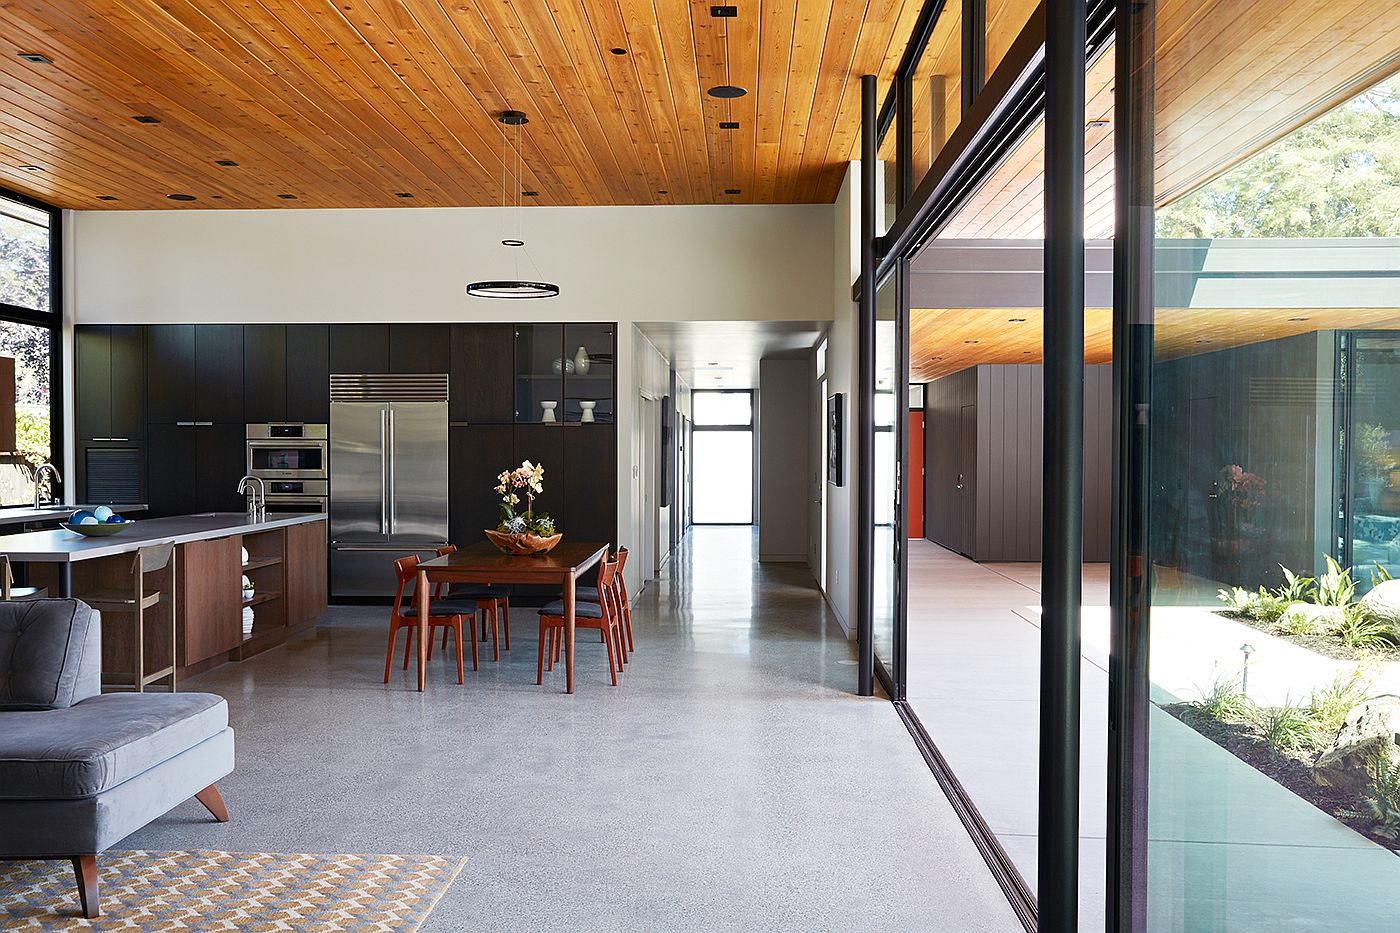 Neutral color scheme and wooden ceiling gives the home that classic Eichler appeal